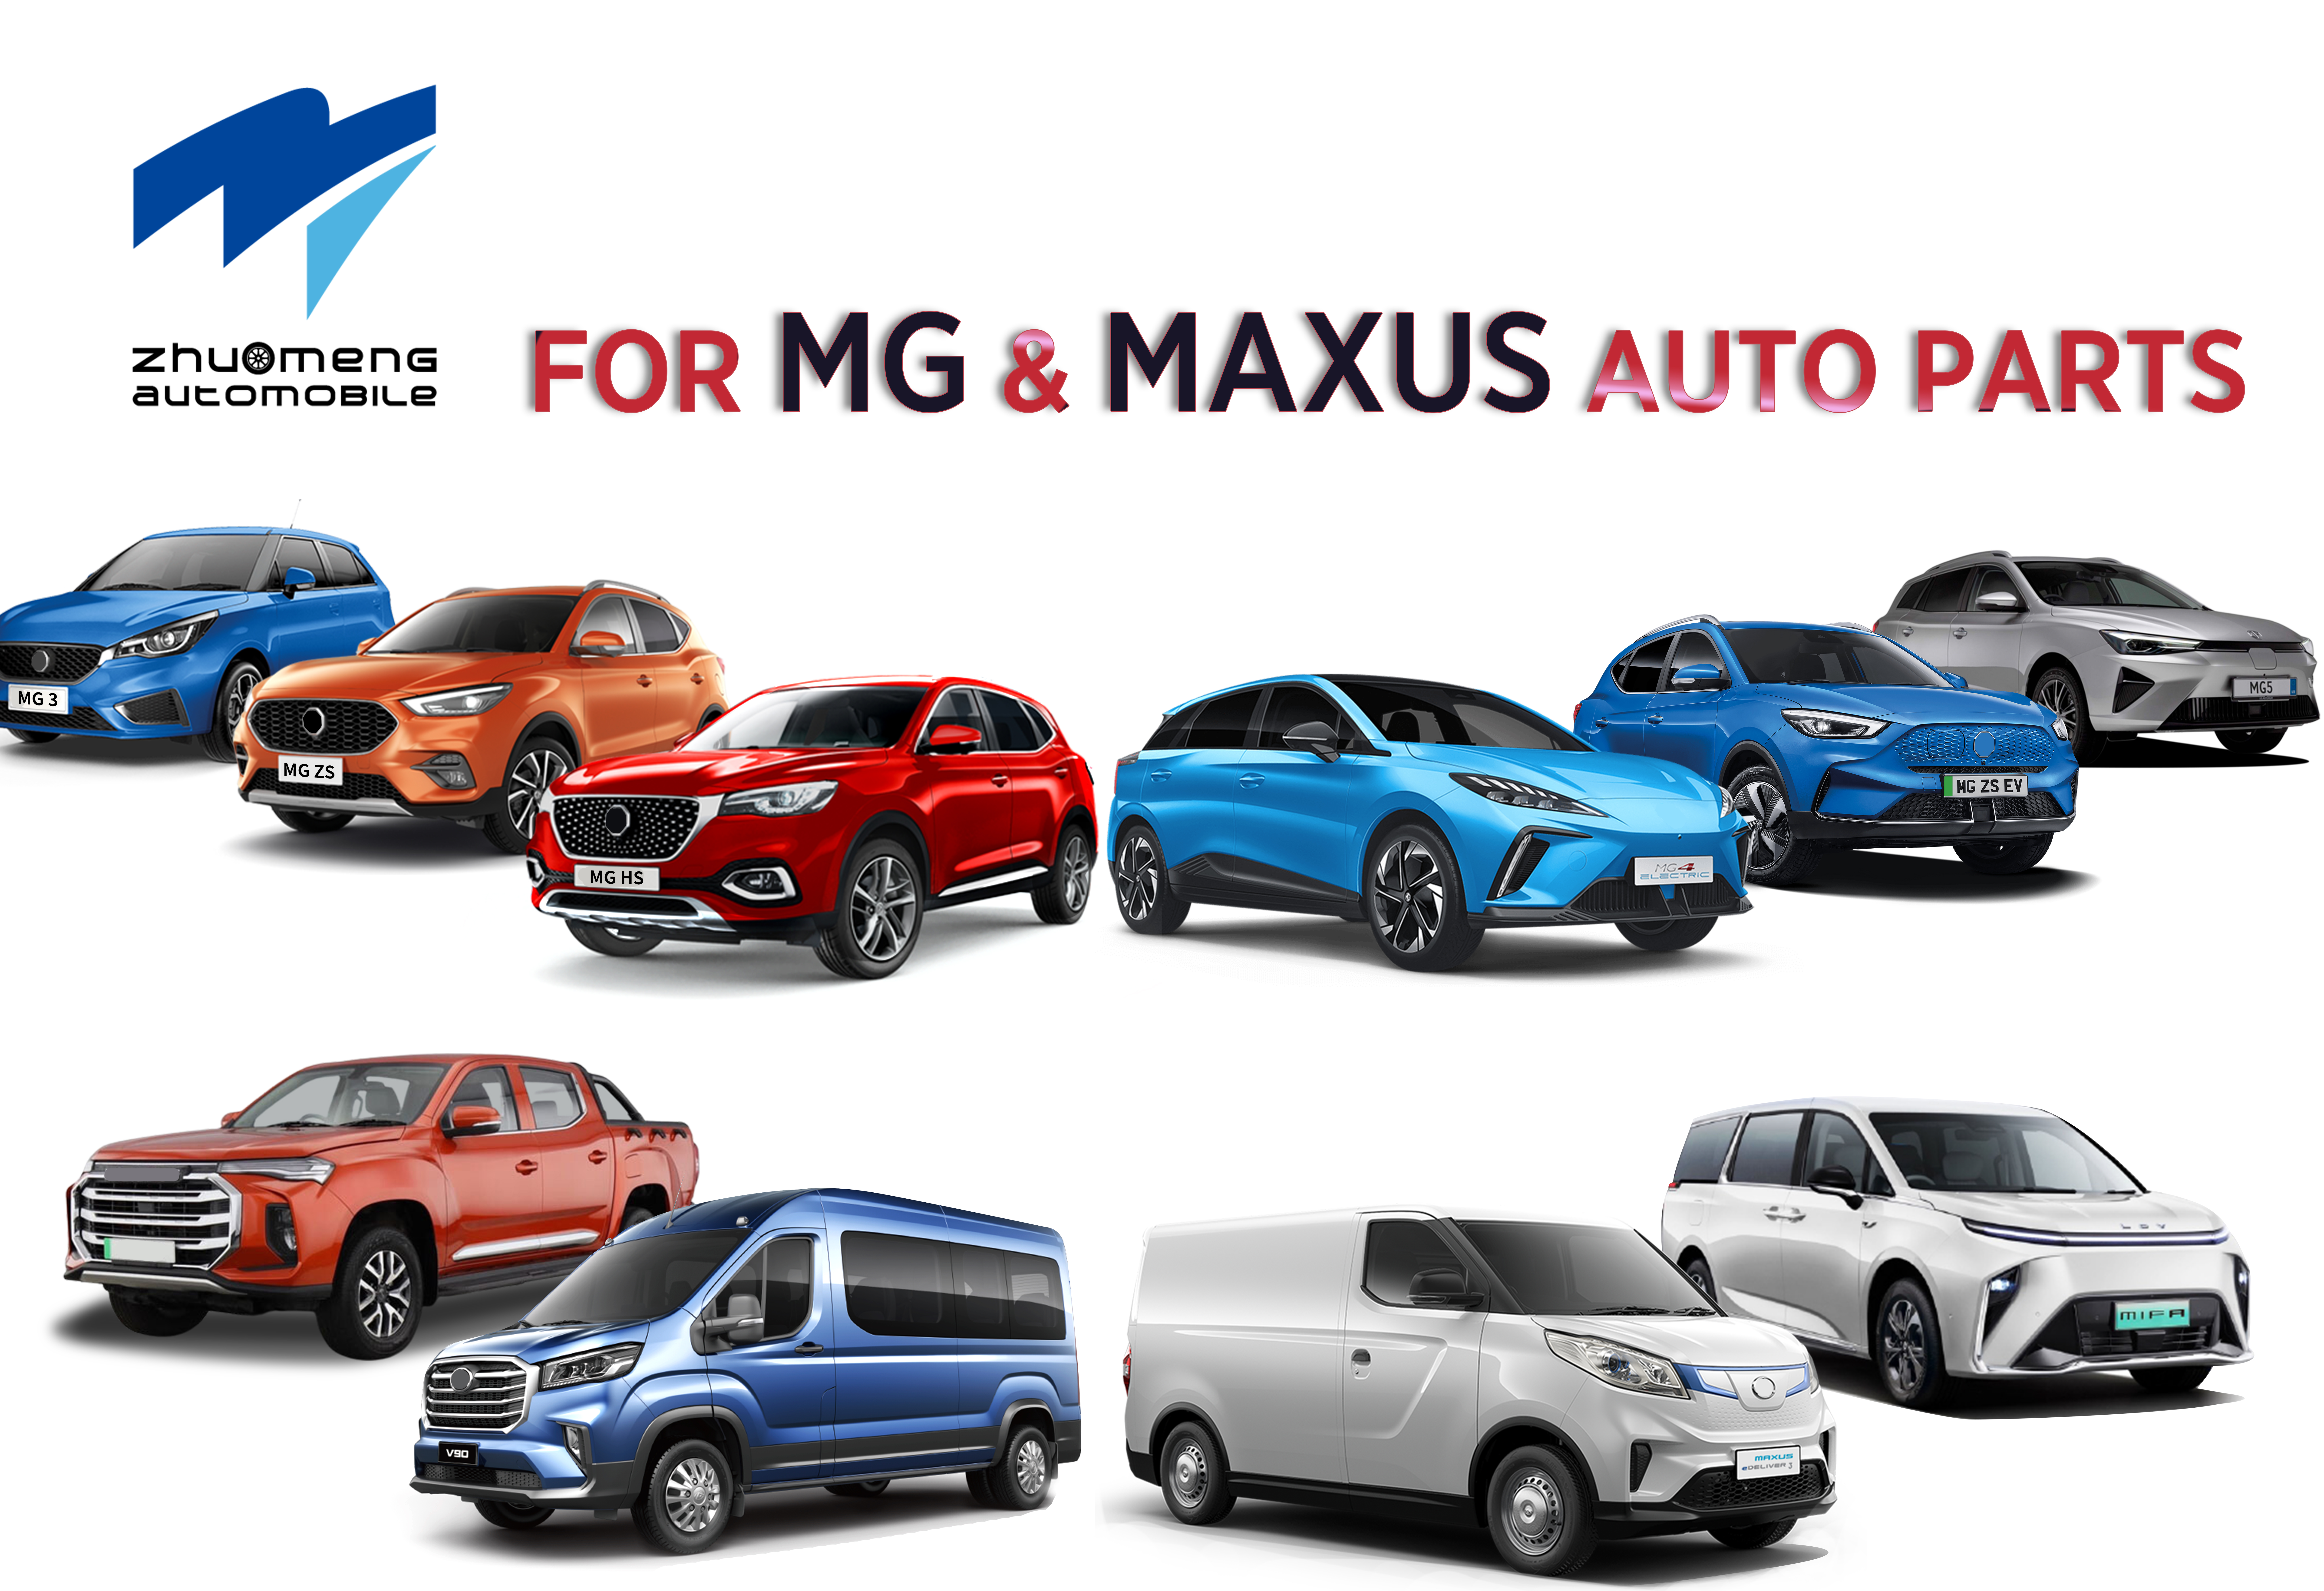 Why choose our MG&MAXUS accessories?